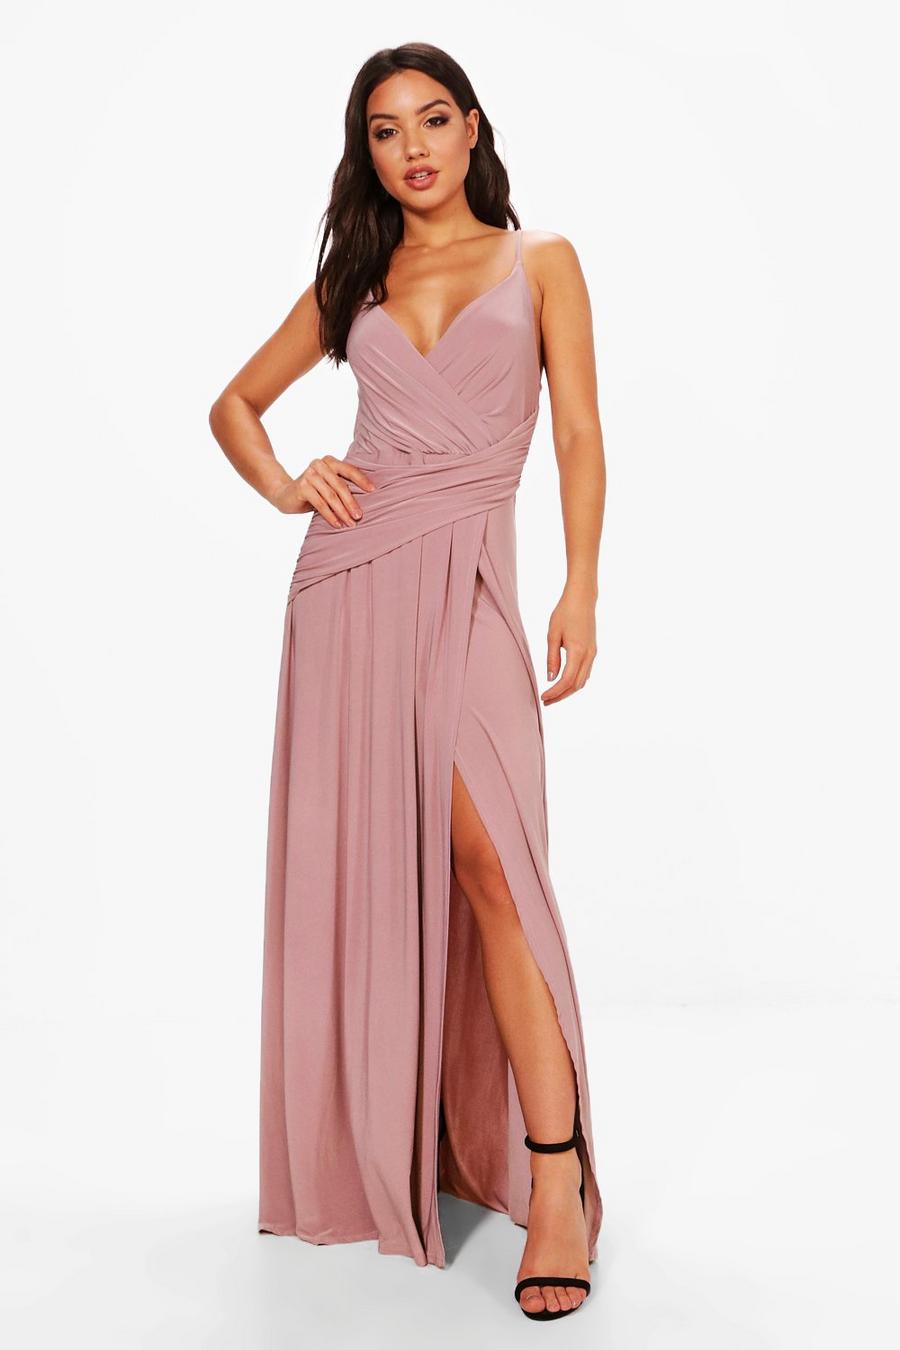 Mauve violet Slinky Wrap Ruched Strappy Maxi Bridesmaid Dress